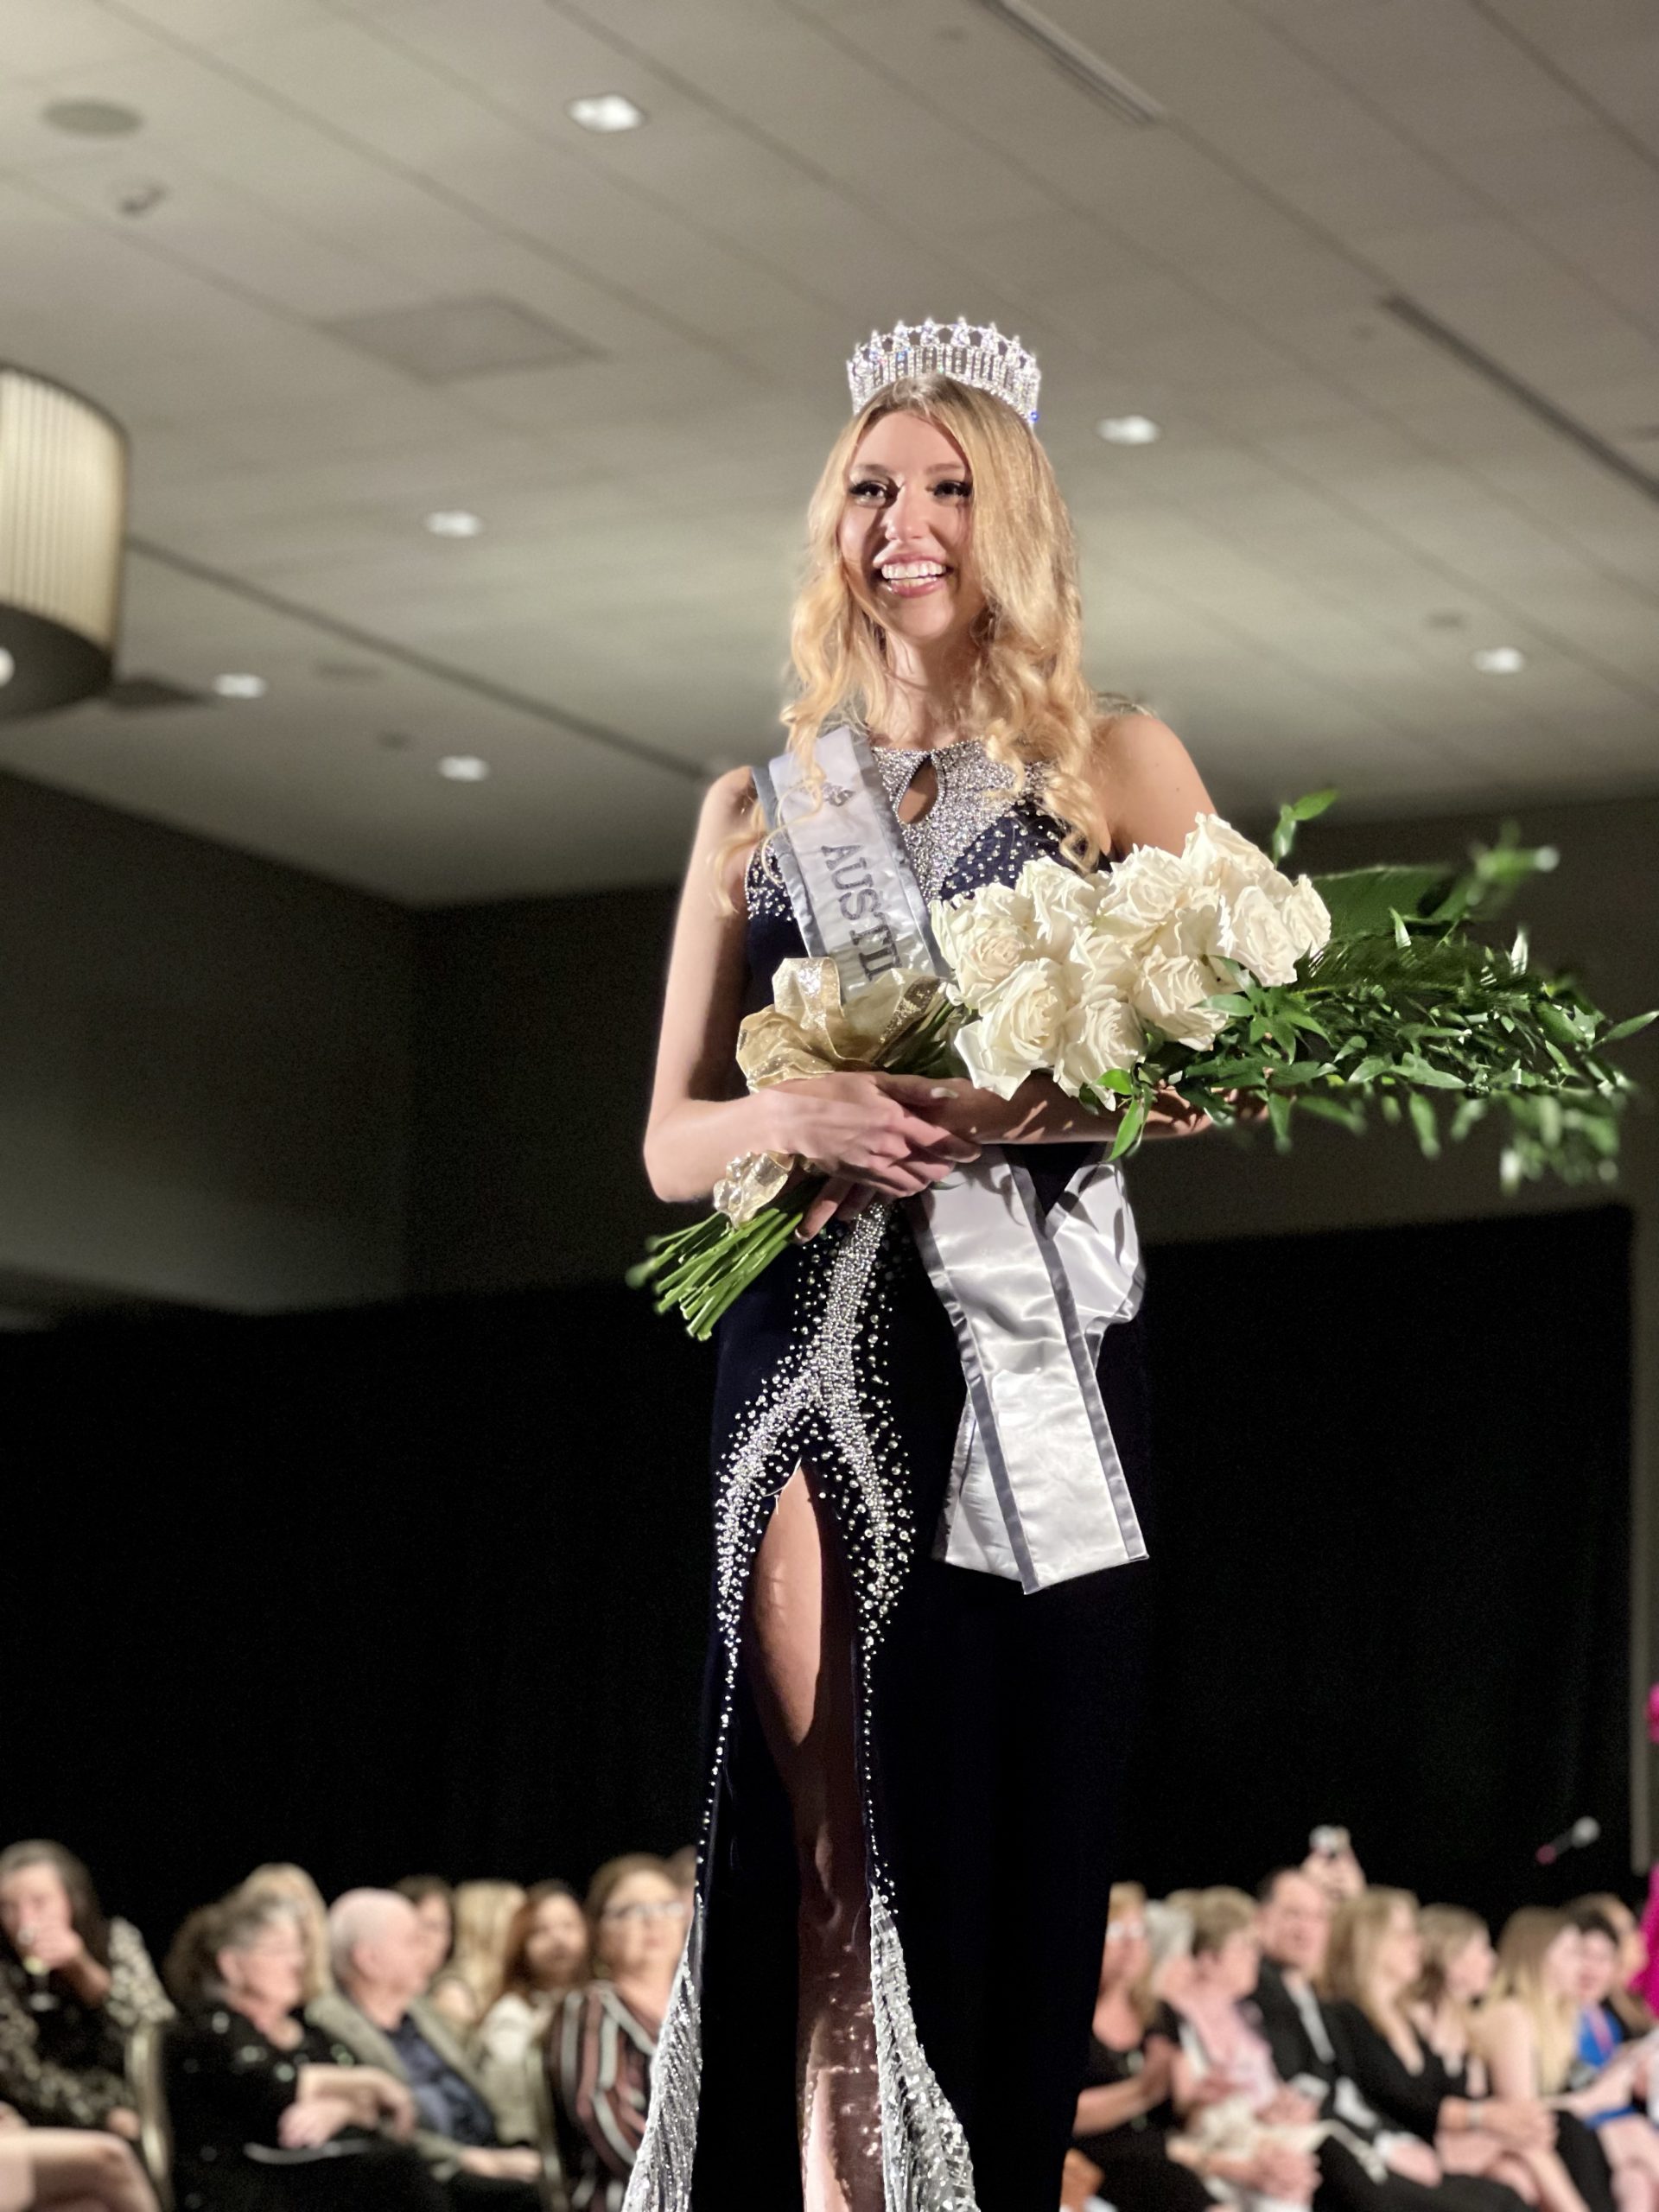 List of Beauty Pageant Interview Questions from Miss Austin Texas 2022